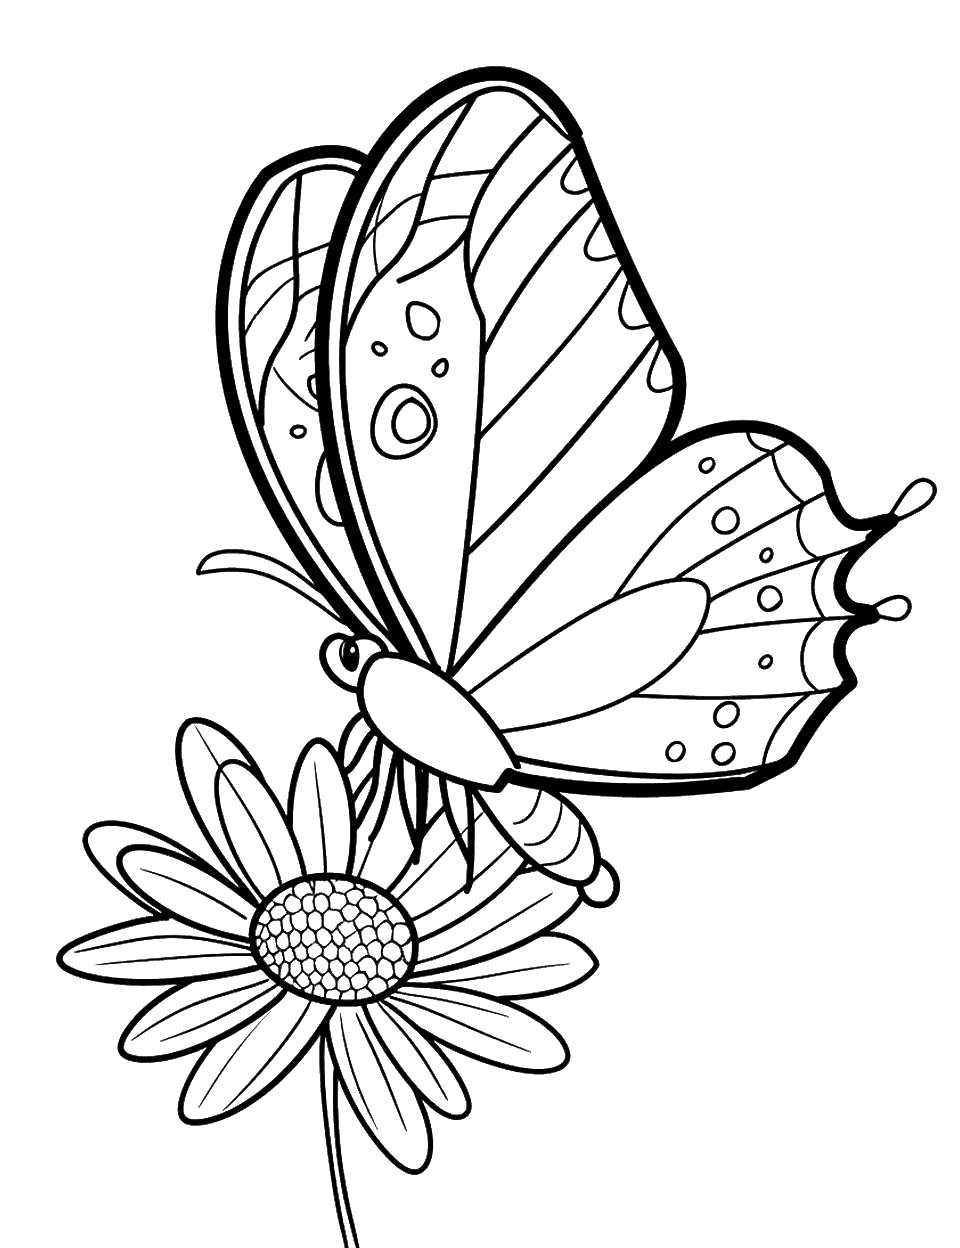 Butterfly Landing on a Flower Toddler Coloring Page - A large butterfly landing gently on a flower.